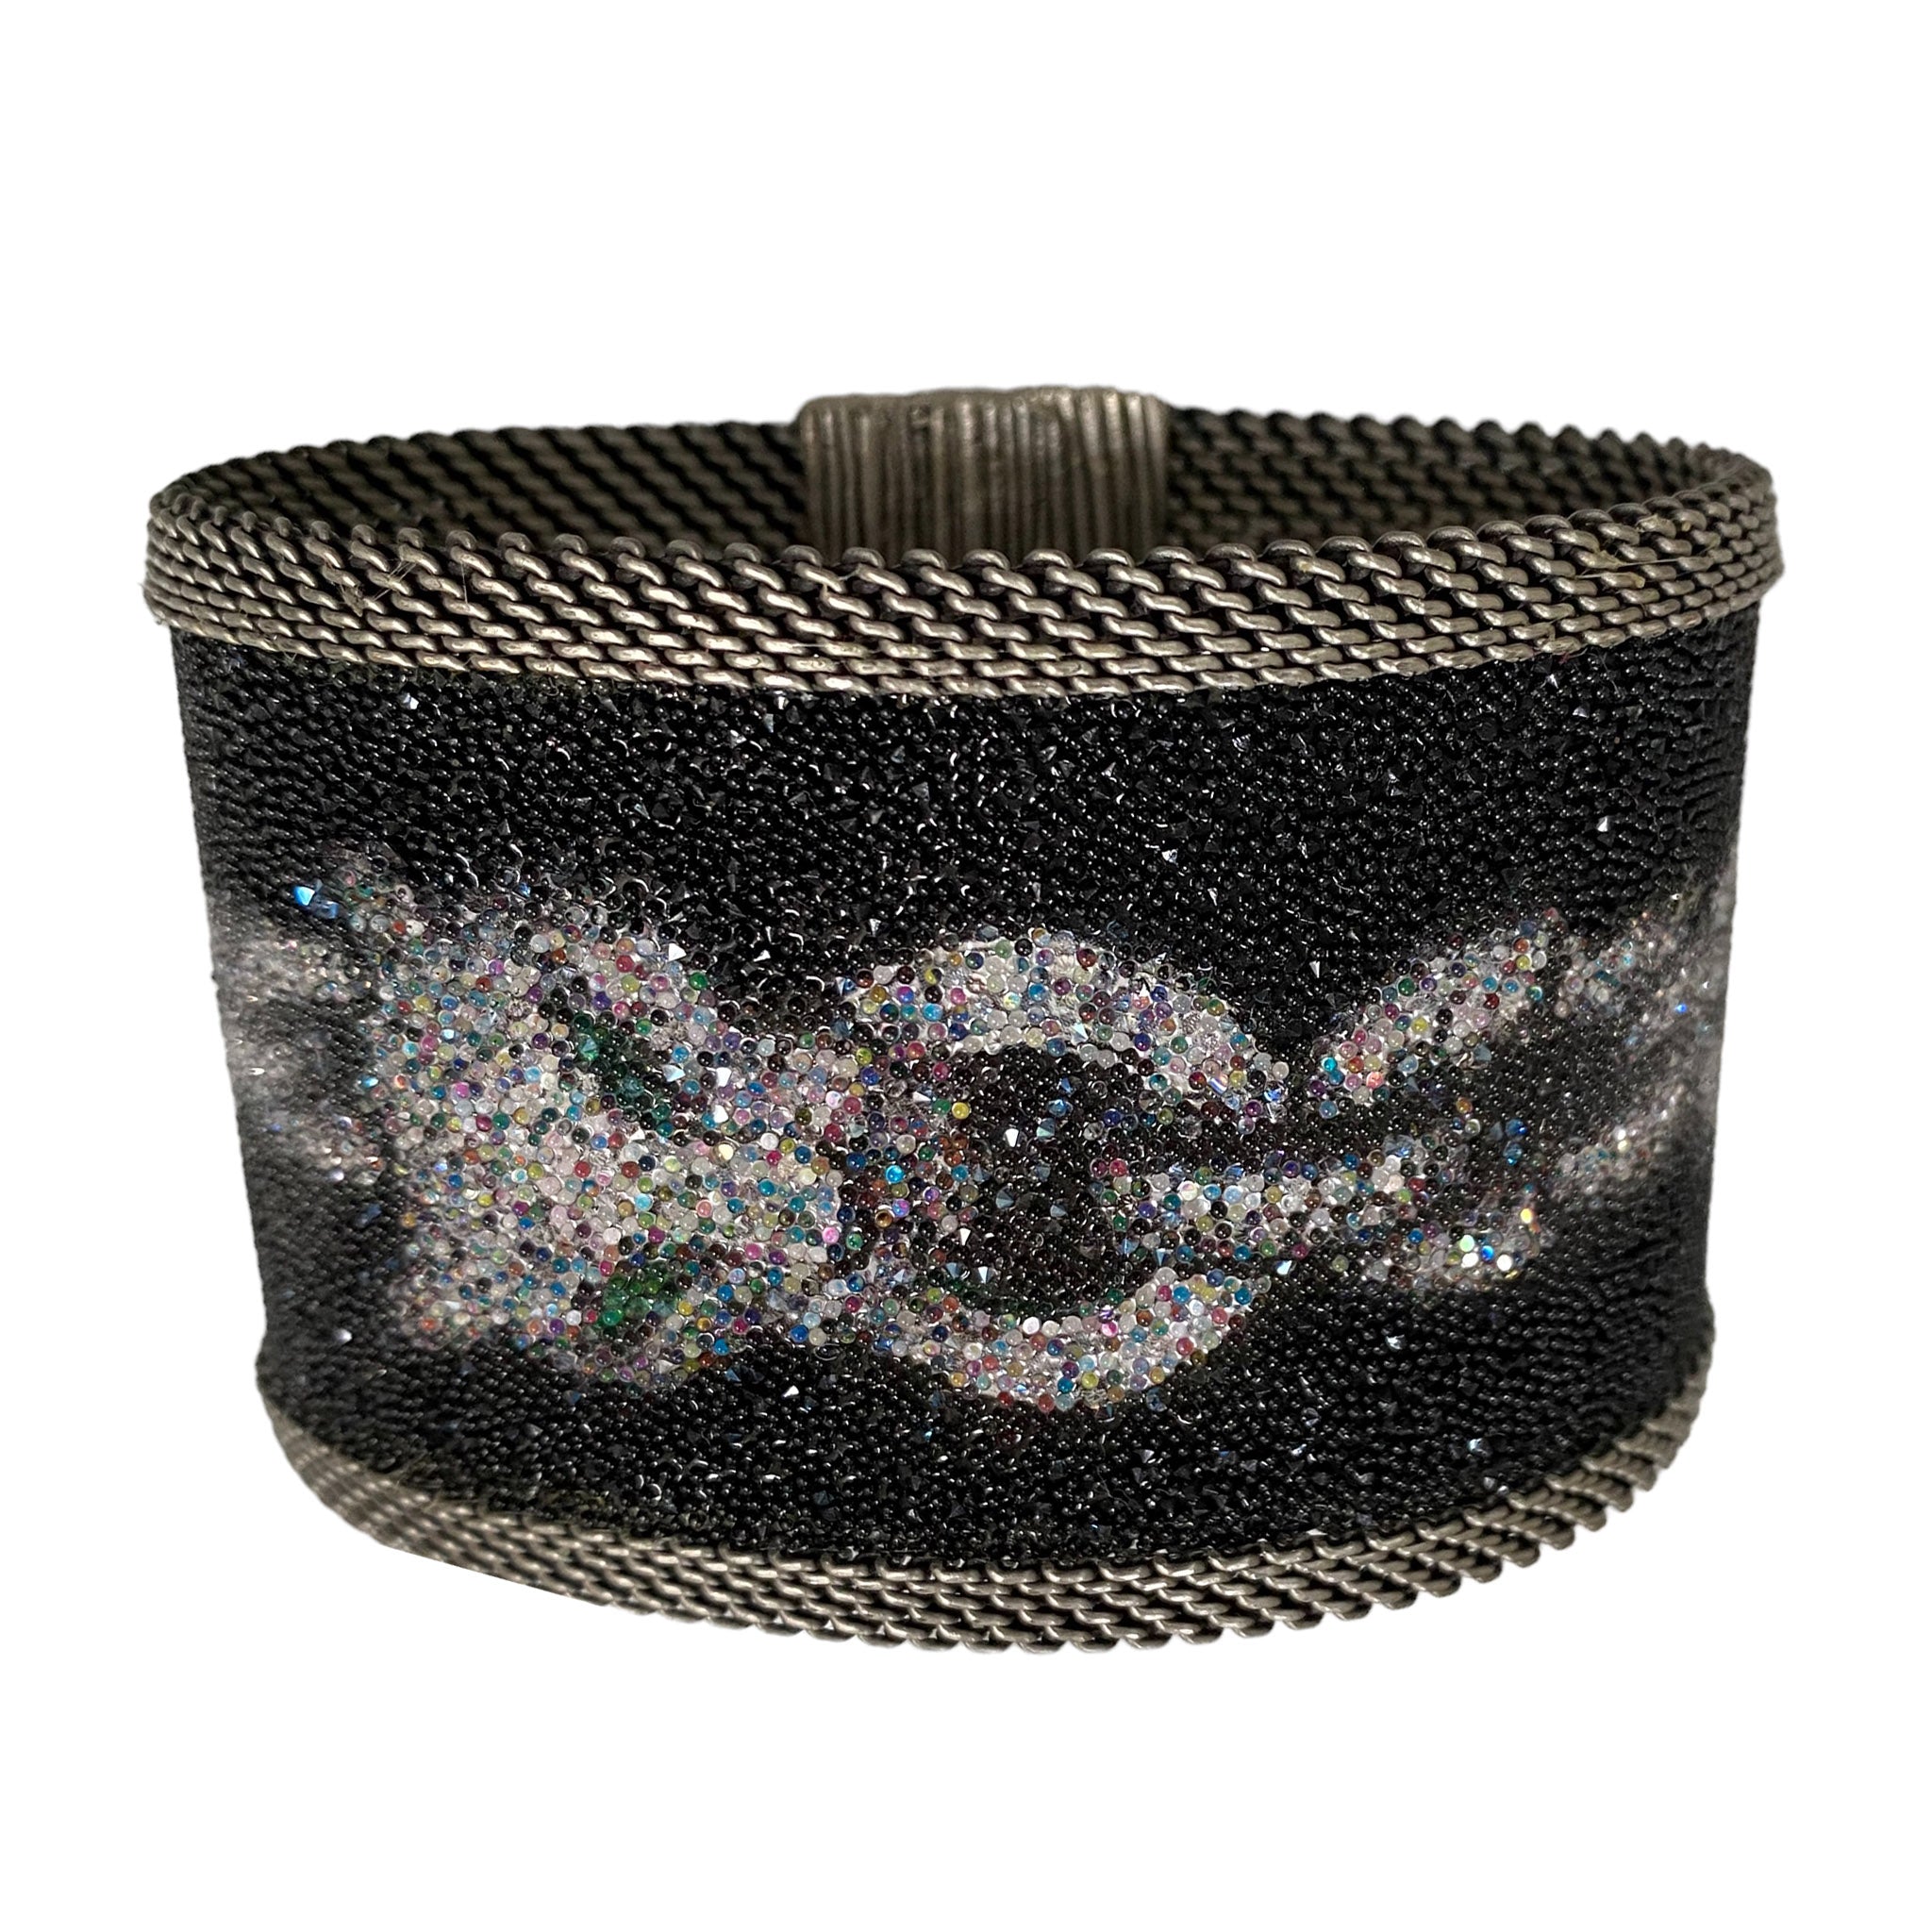 Shimmery Leopard head 'Pave Link' Cuff, White Gold on Black